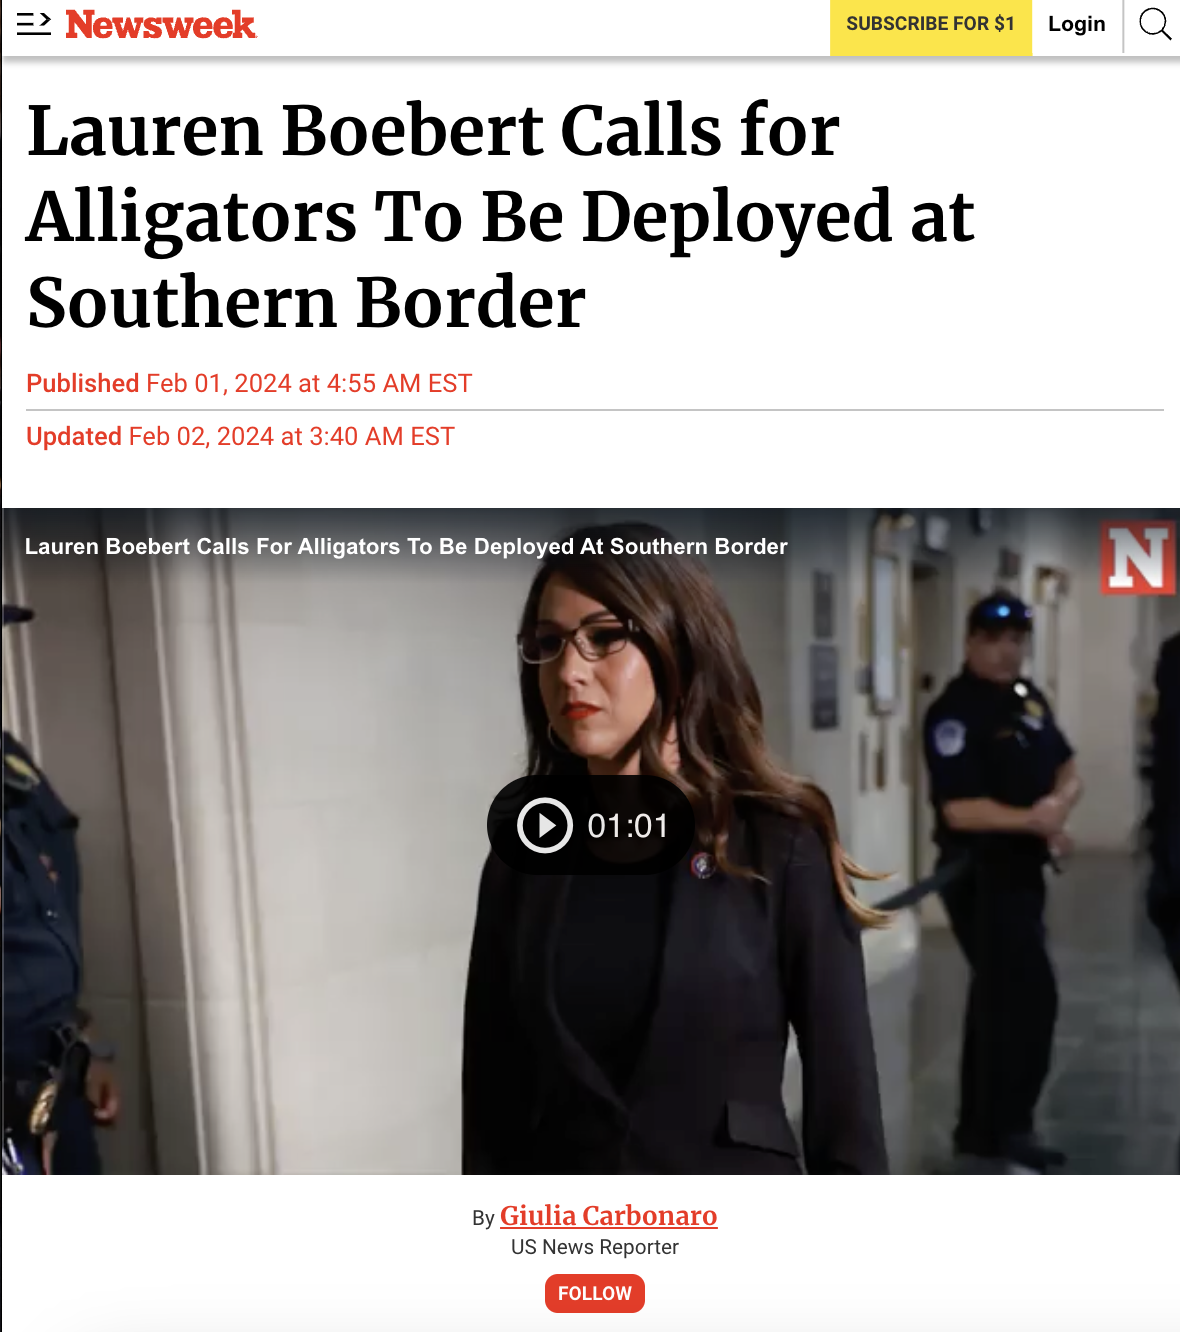 girl - Newsweek Lauren Boebert Calls for Subscribe For $1 Login Q Alligators To Be Deployed at Southern Border Published at Est Updated at Est Lauren Boebert Calls For Alligators To Be Deployed At Southern Border N By Giulia Carbonaro Us News Reporter